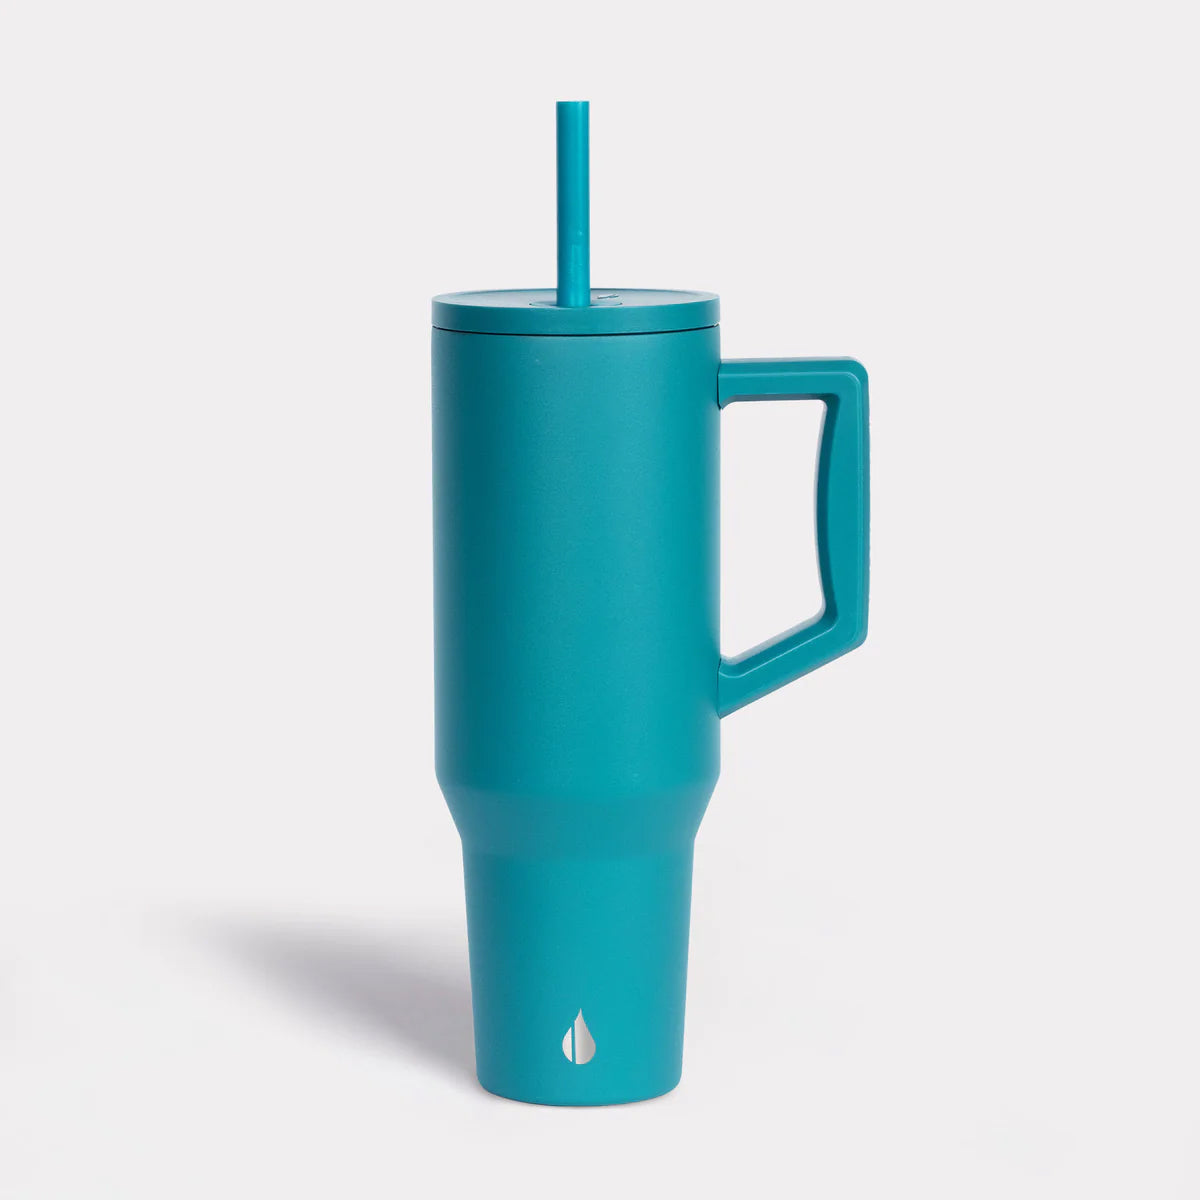 Customized Elemental 40 oz stainless steel tumbler with interchangeable straws in teal.